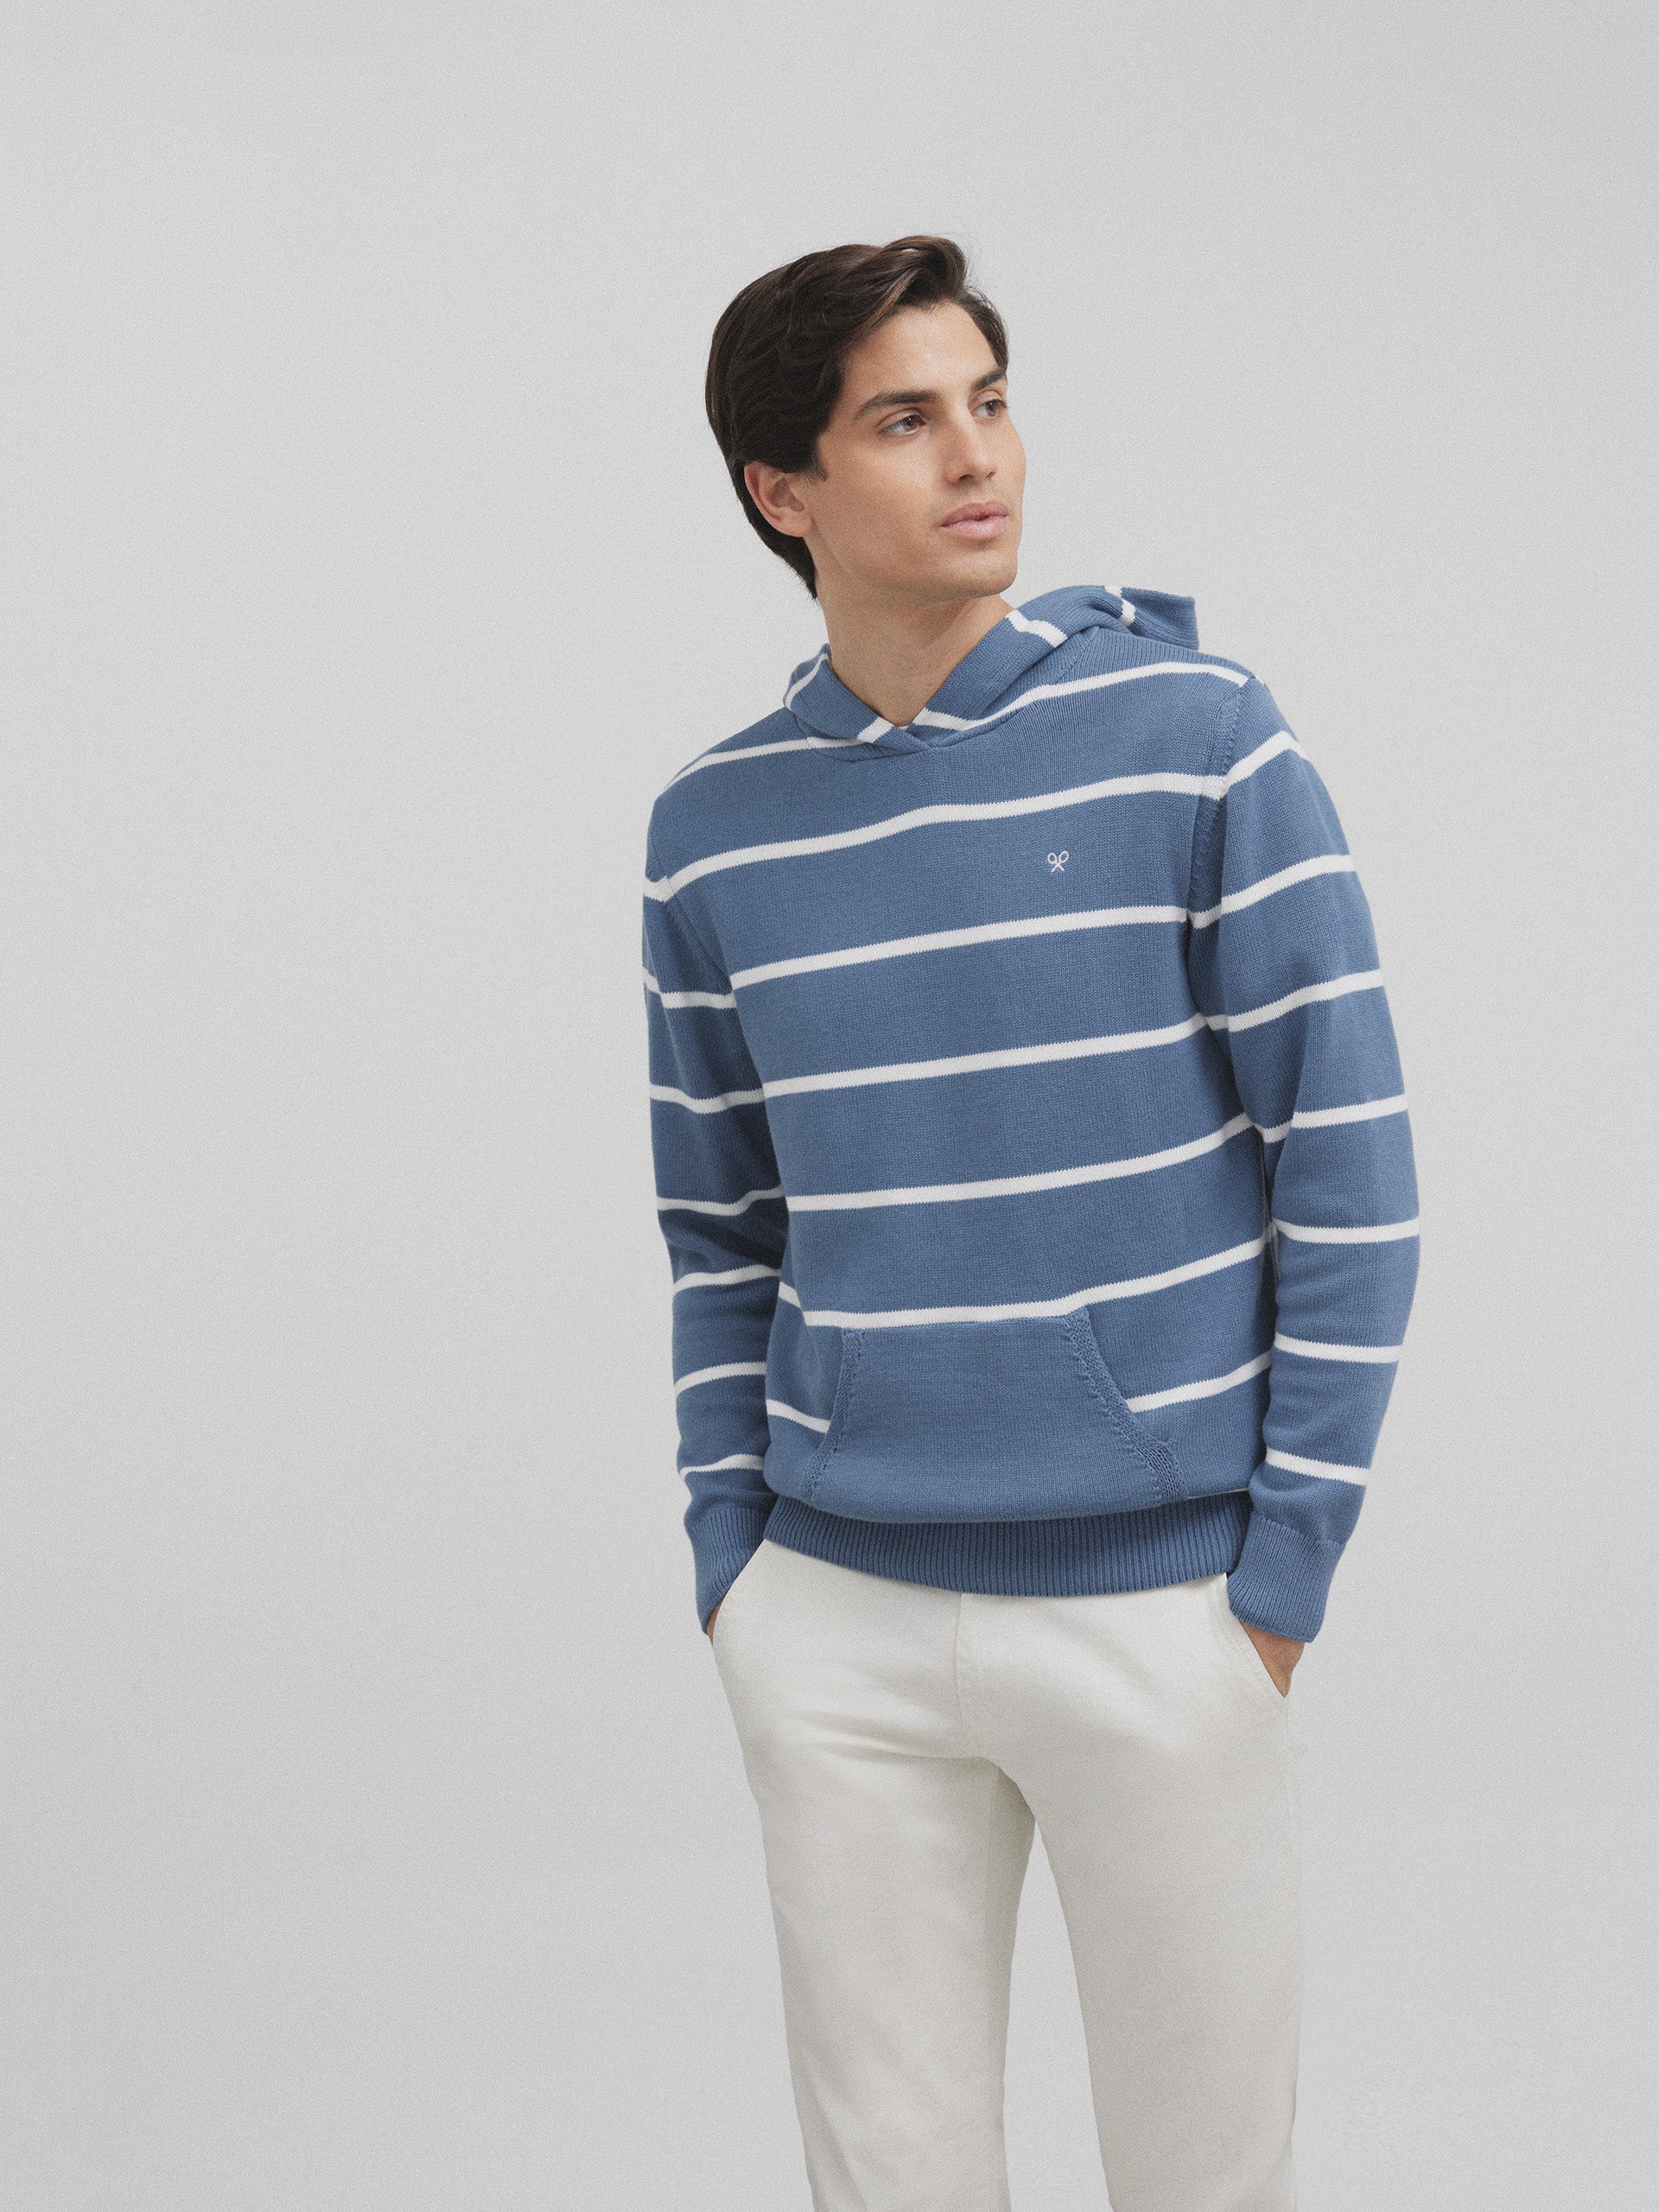 Blue striped hooded sweater